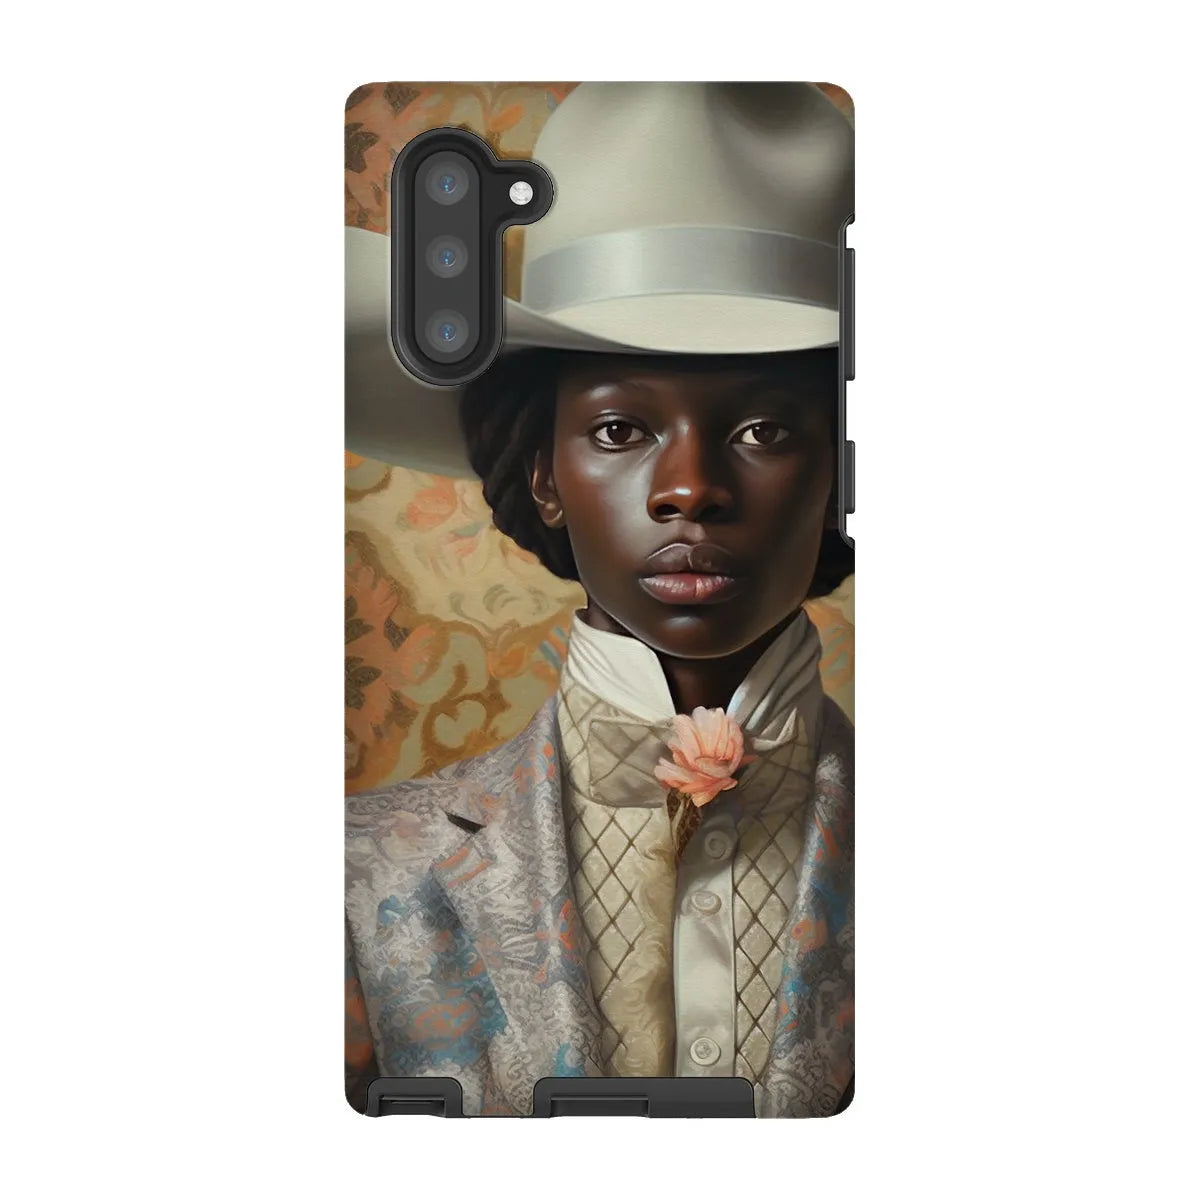 Caesar The Gay Cowboy - Gay Aesthetic Art Phone Case - Samsung Galaxy Note 10 / Matte - Mobile Phone Cases - Aesthetic